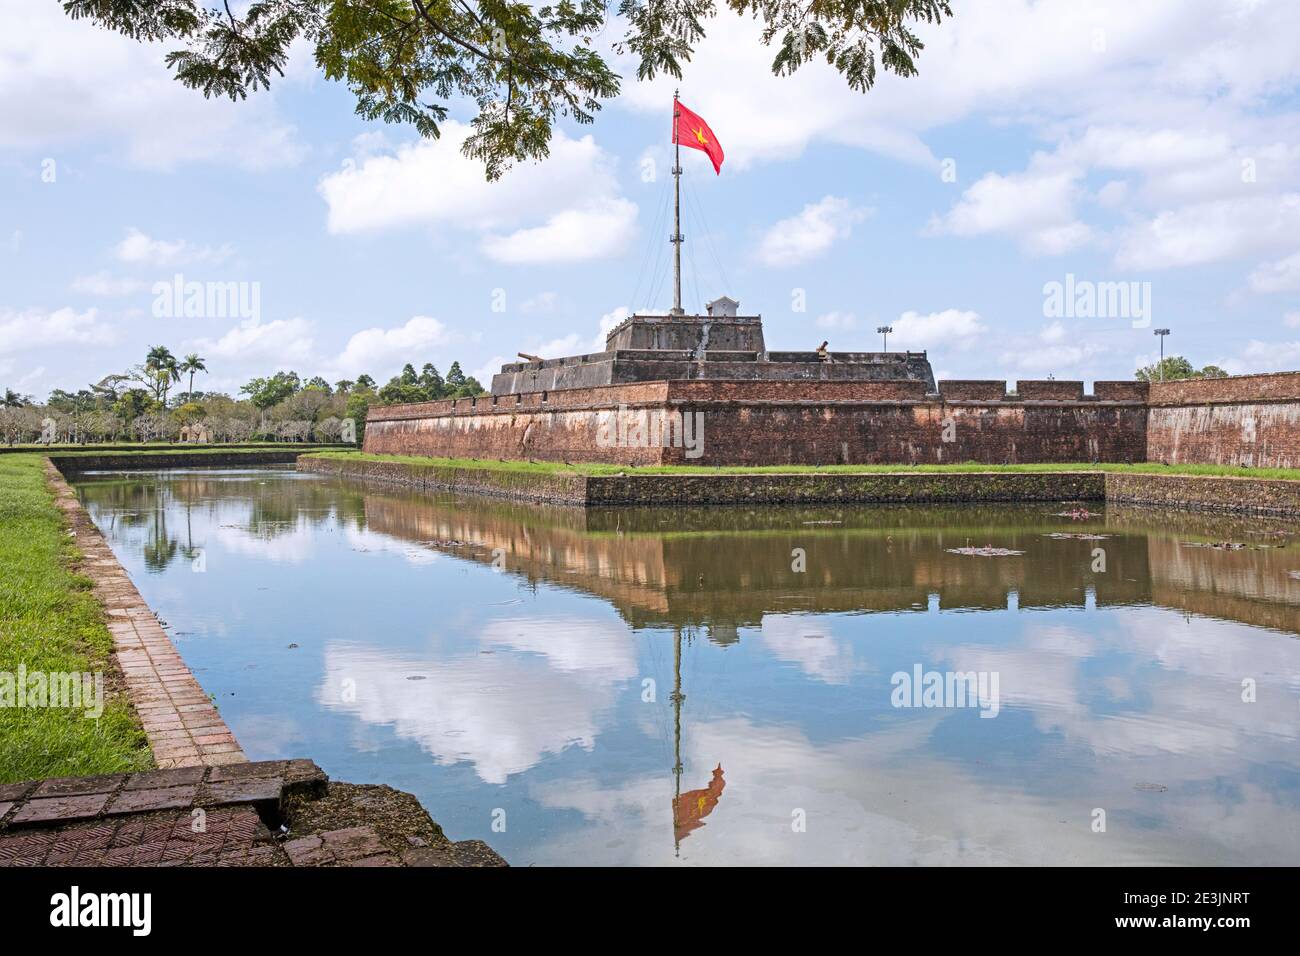 Imperial City of Huế / Hue, walled enclosure within the citadel, Thừa Thiên-Huế Province, central Vietnam Stock Photo